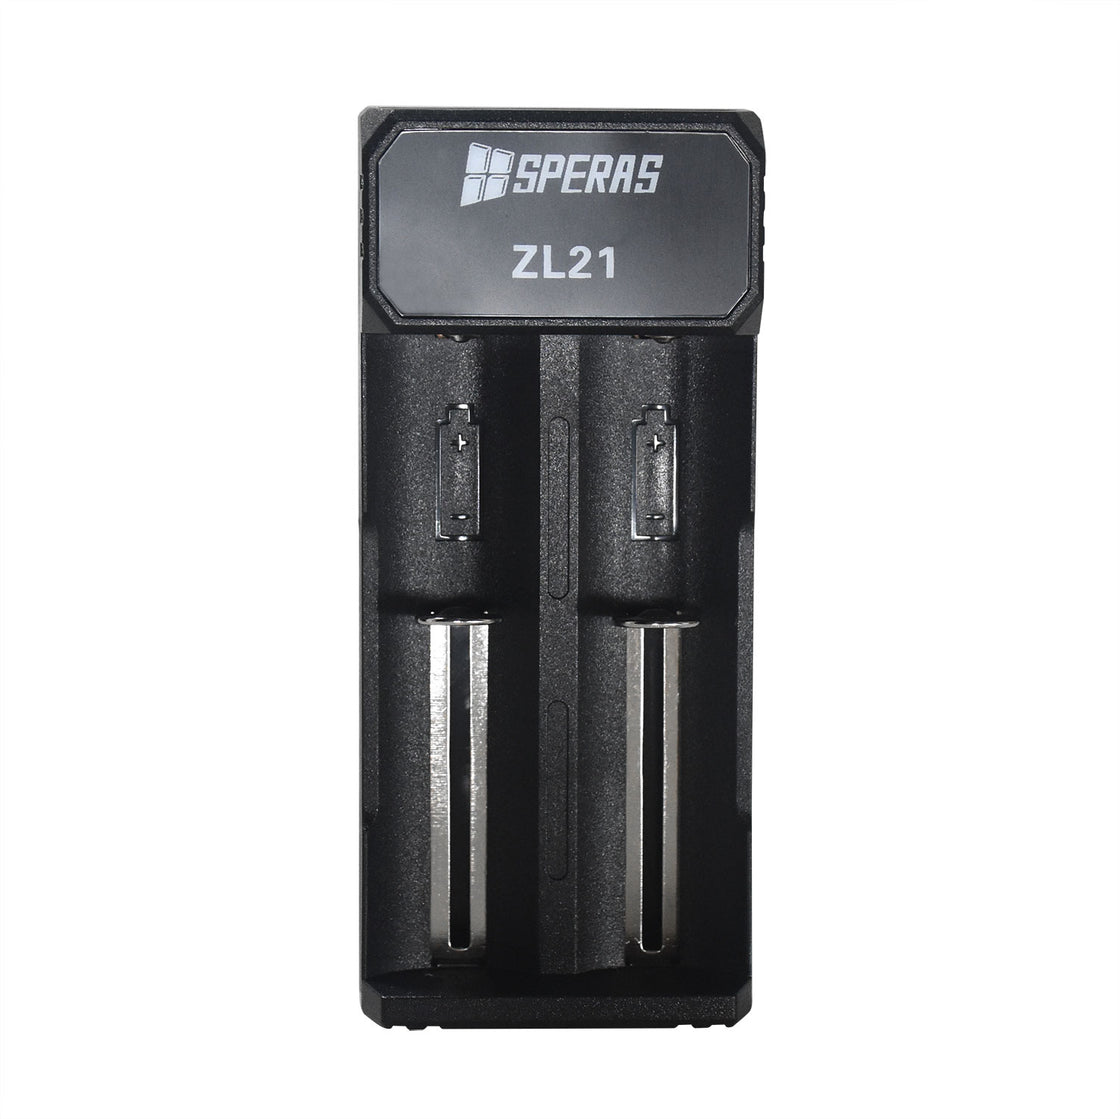 SPERAS 21700 dual-slot Type C-USB battery charger